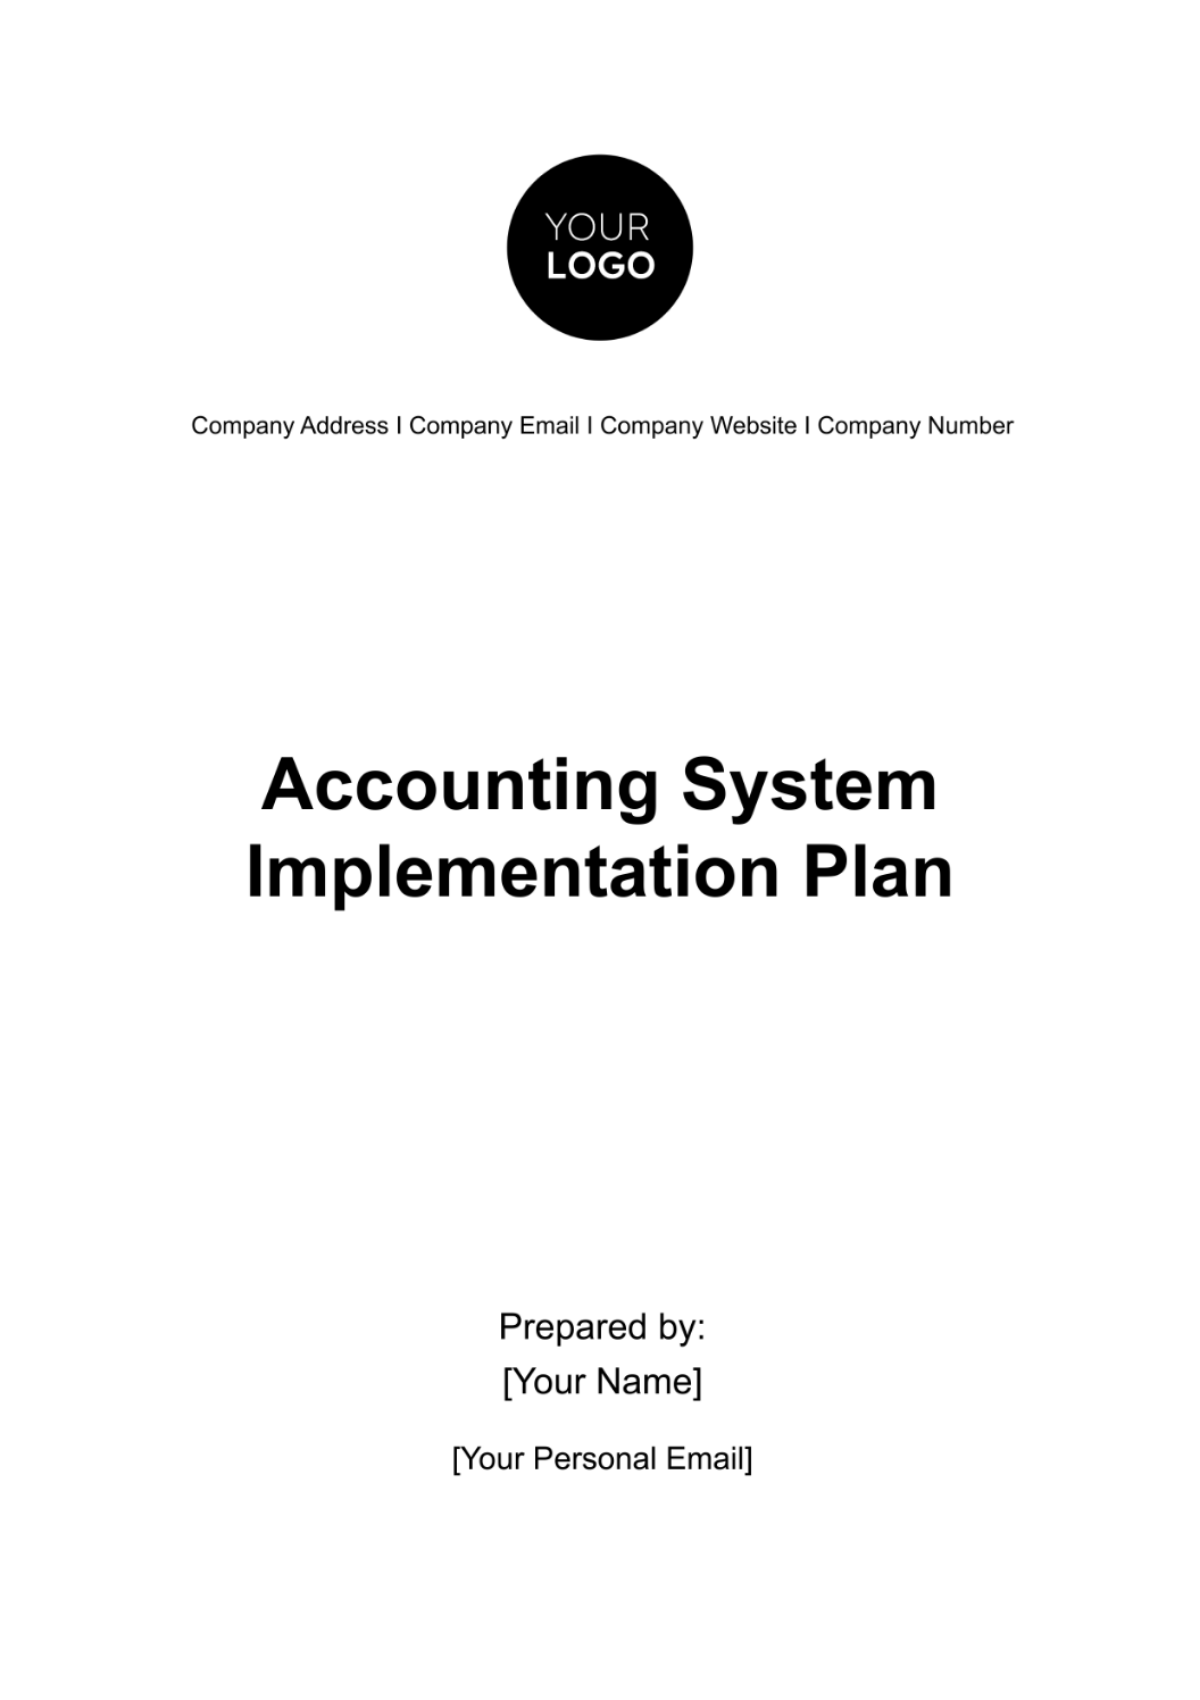 Accounting System Implementation Plan Template